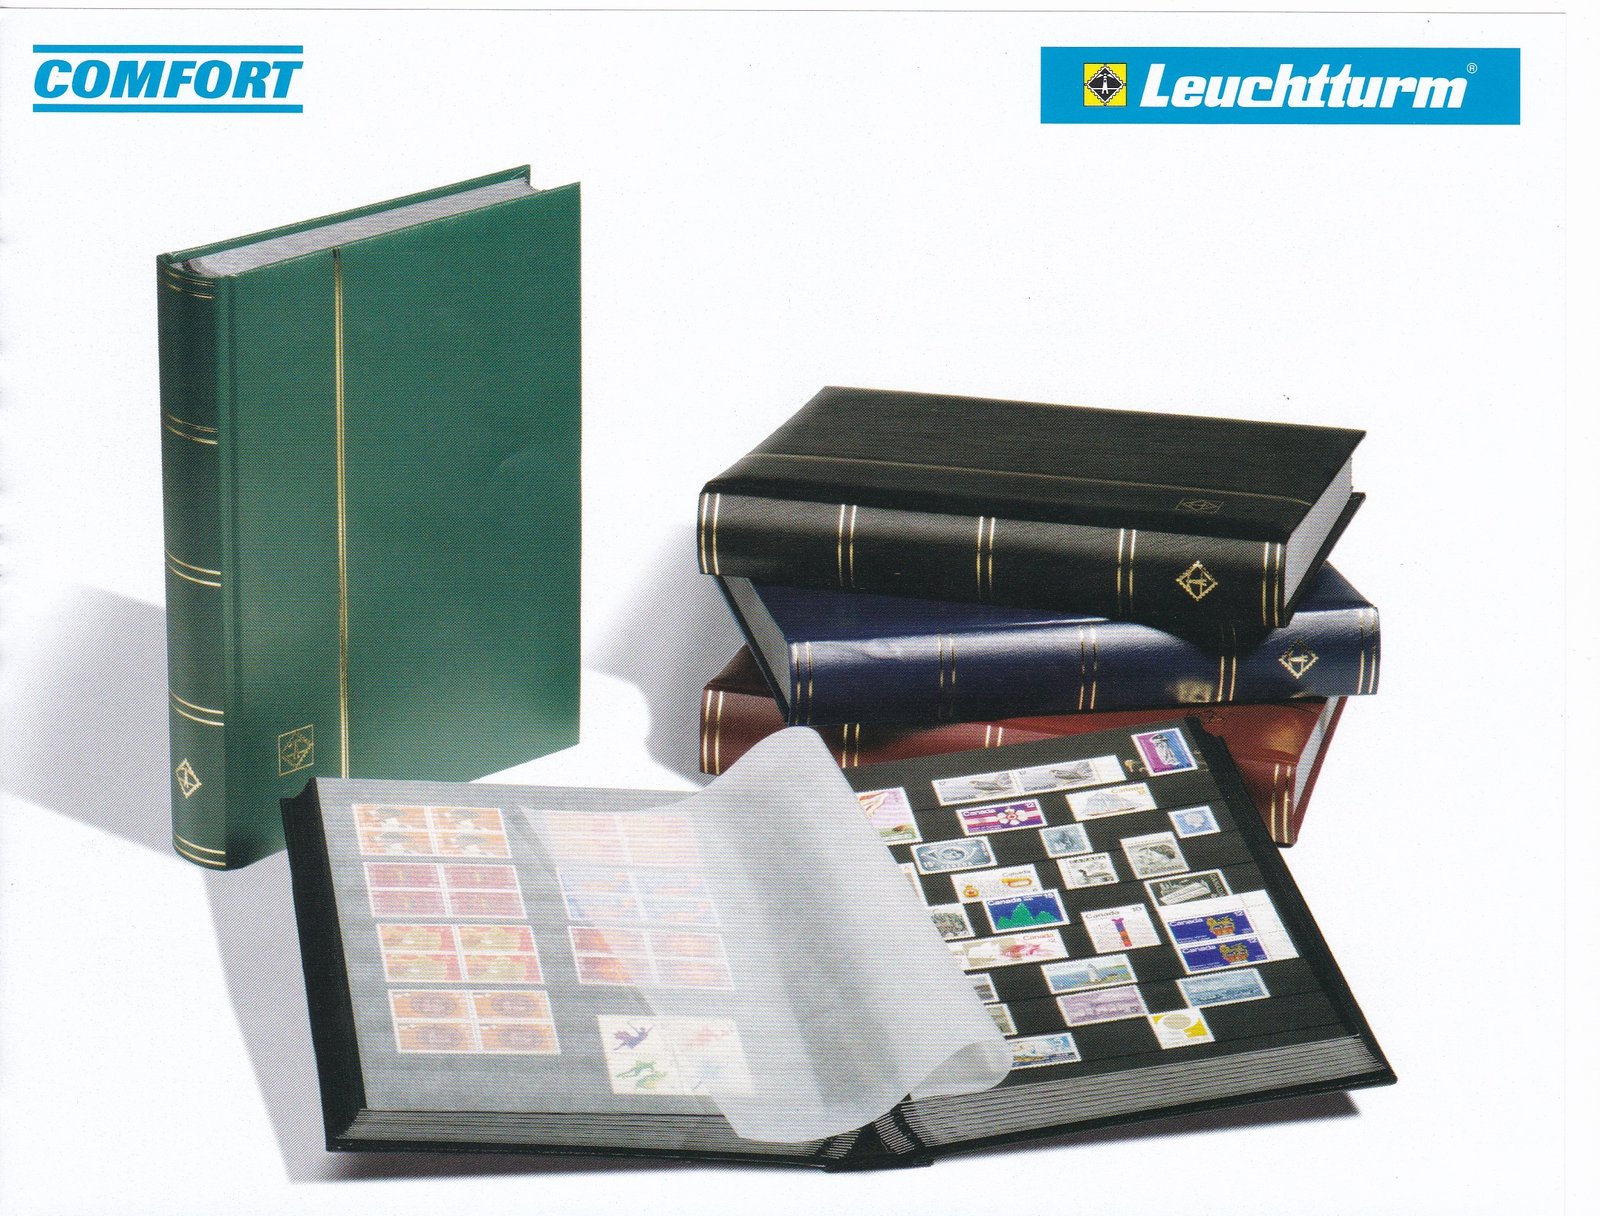 LIGHTHOUSE COMFORT Stockbook, 64 Pages (32 Sheets), A4, Padded Leatherette Cover, Black pages, Clear strips and Glassine Interleaves, Cover Colors- Red/Green/Black/Blue | LIGHTHOUSE STAMP ALBUM